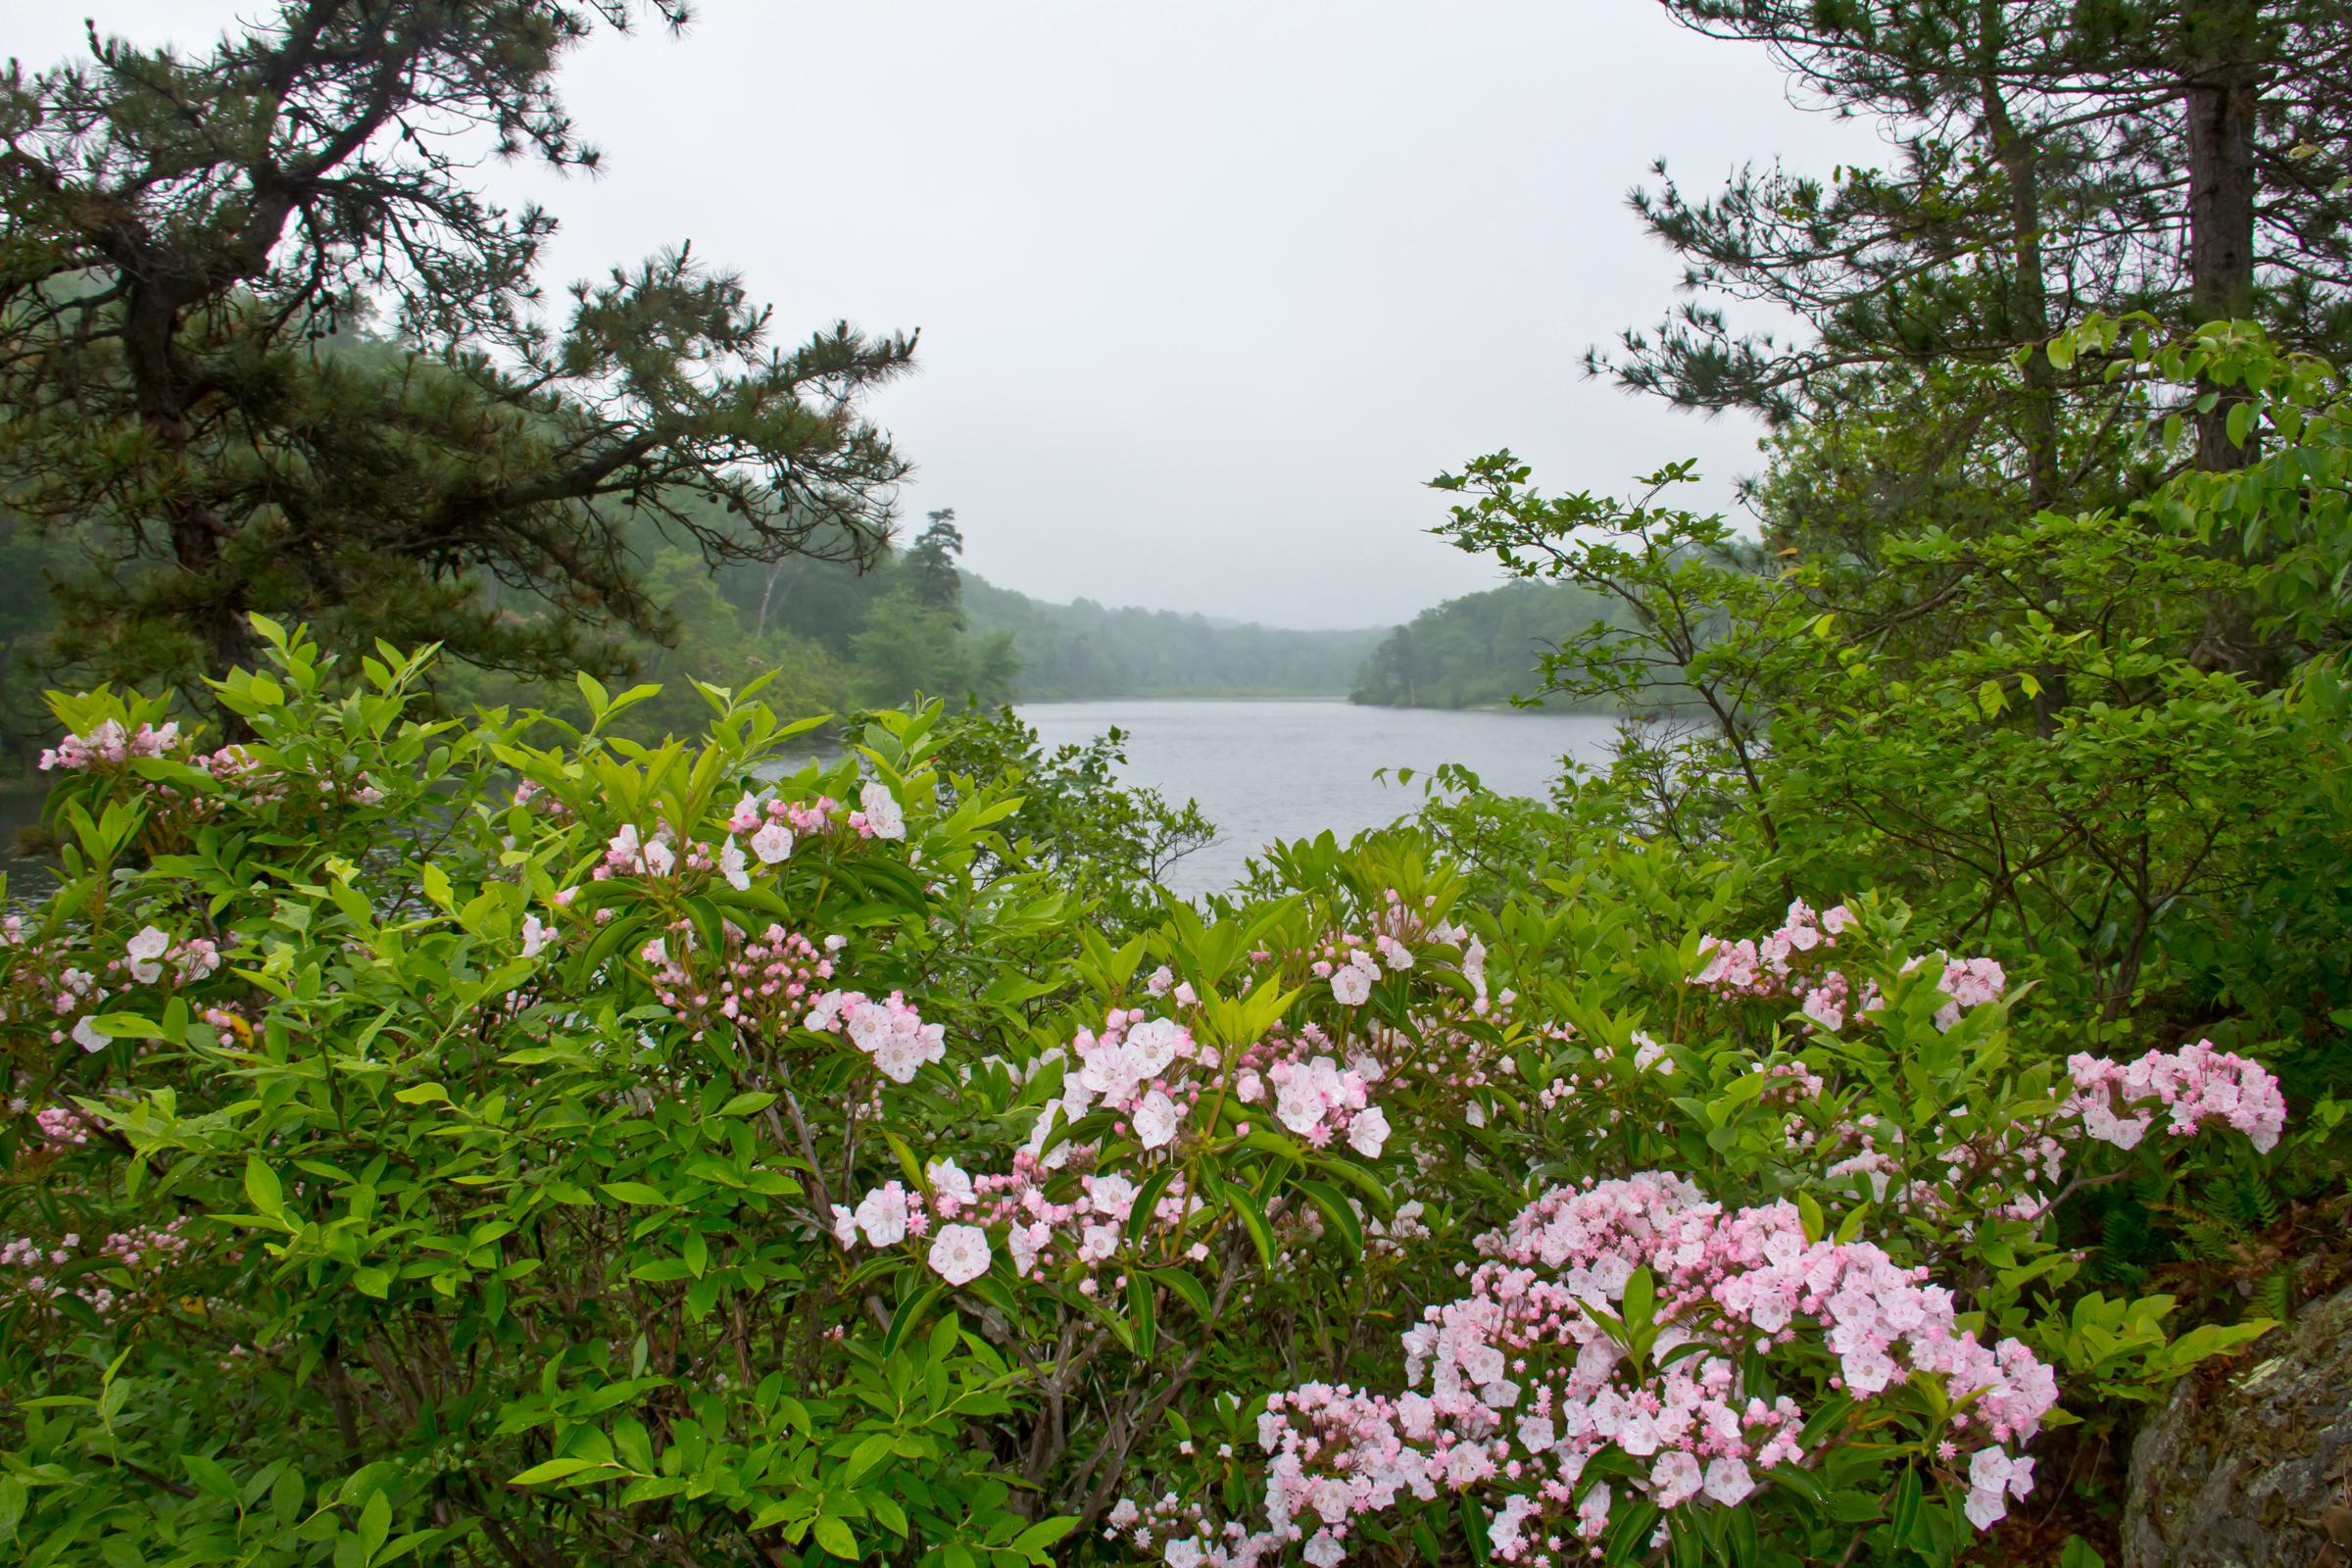 view of pond with pink mountain laurel flowers in the foreground